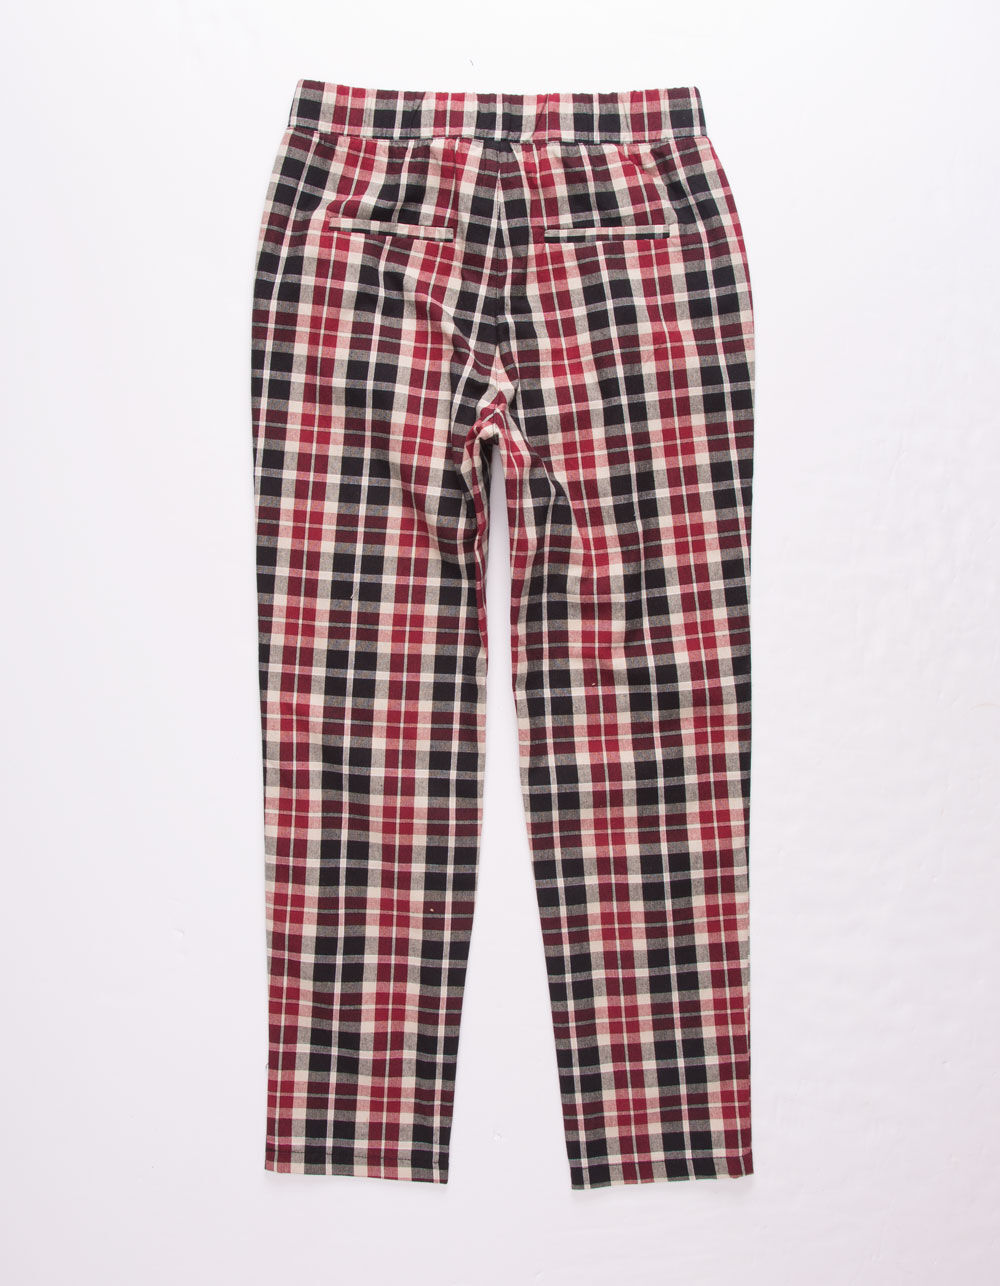 WHITE FAWN Plaid Stretch Girls Pants - BLK/RED | Tillys